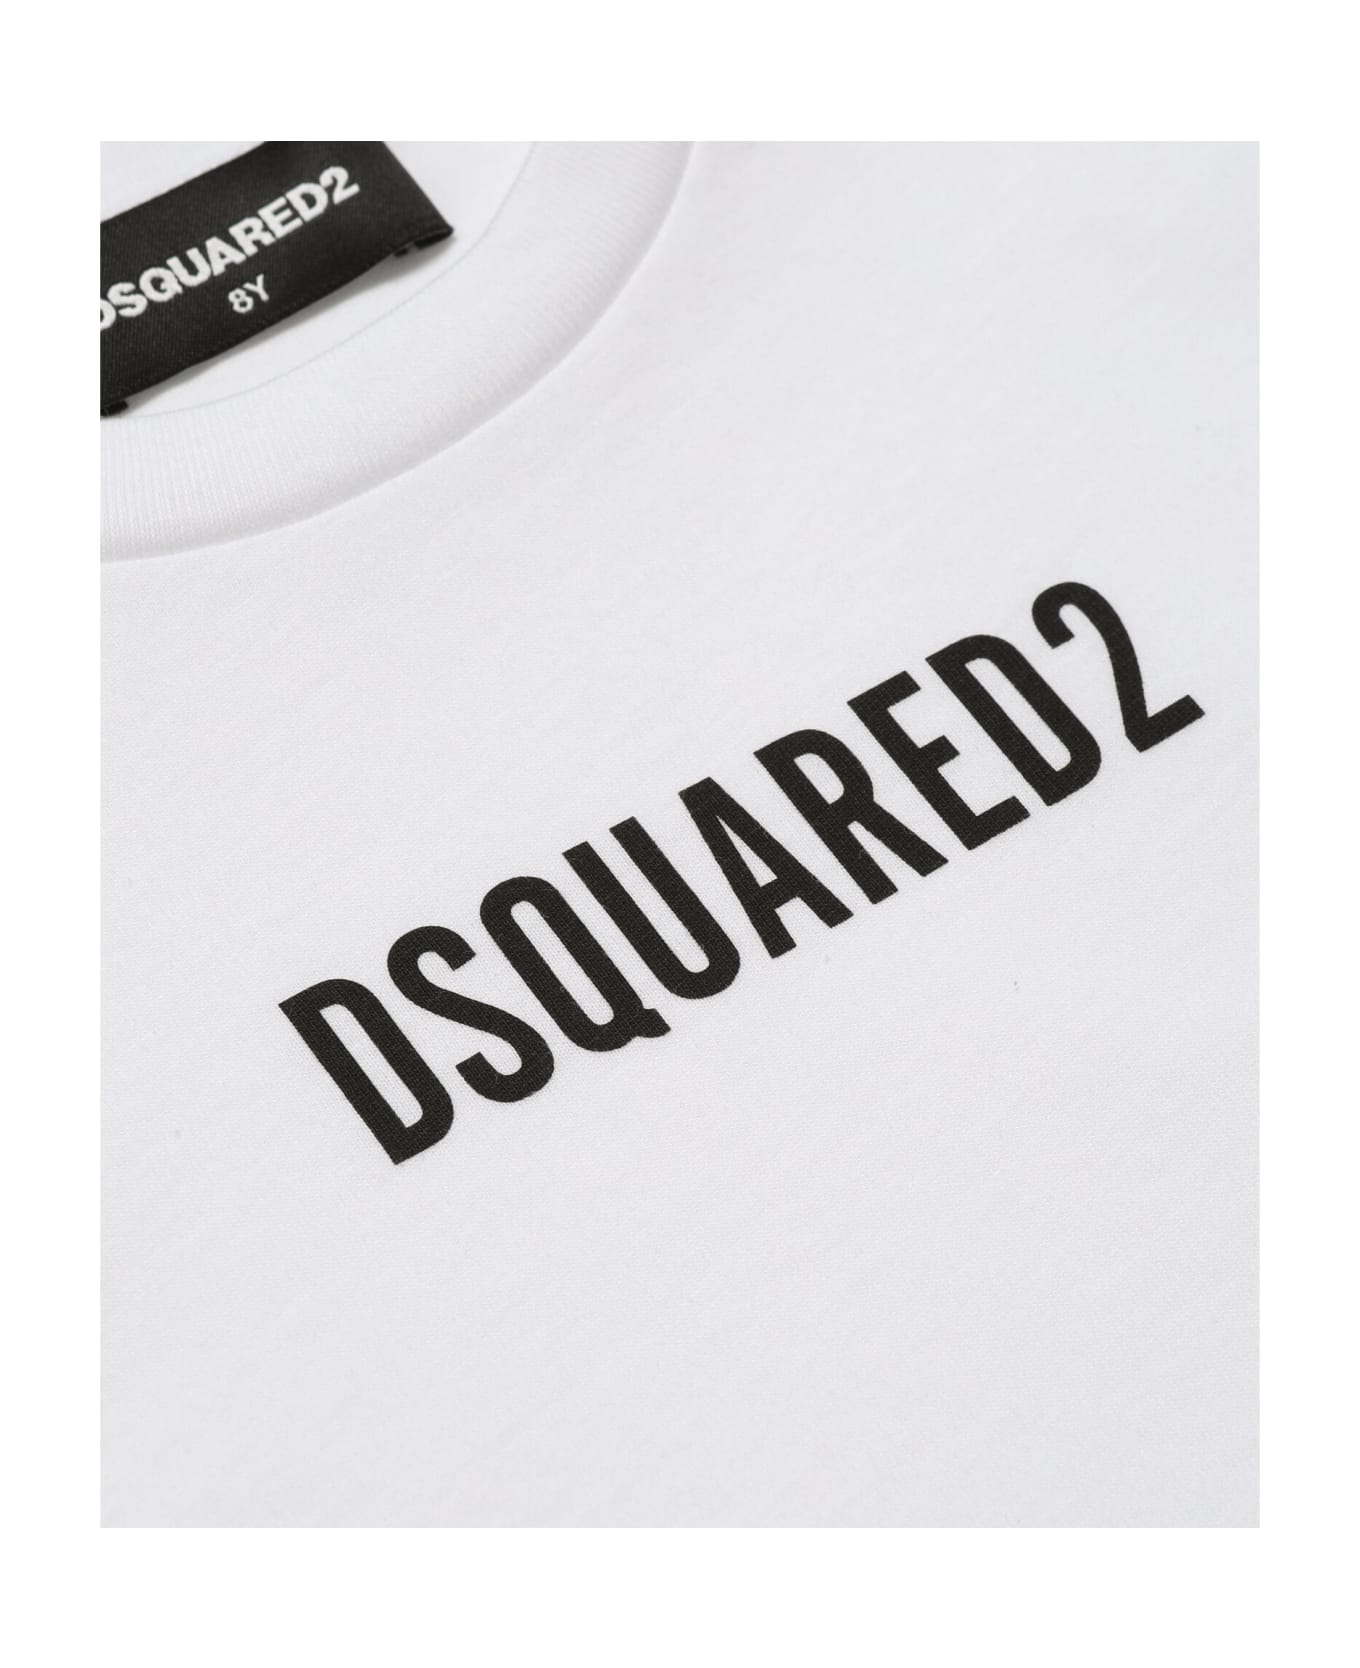 Dsquared2 D2t945u Relax T-shirt Dsquared Crew-neck Jersey T-shirt With Logo - Bianco